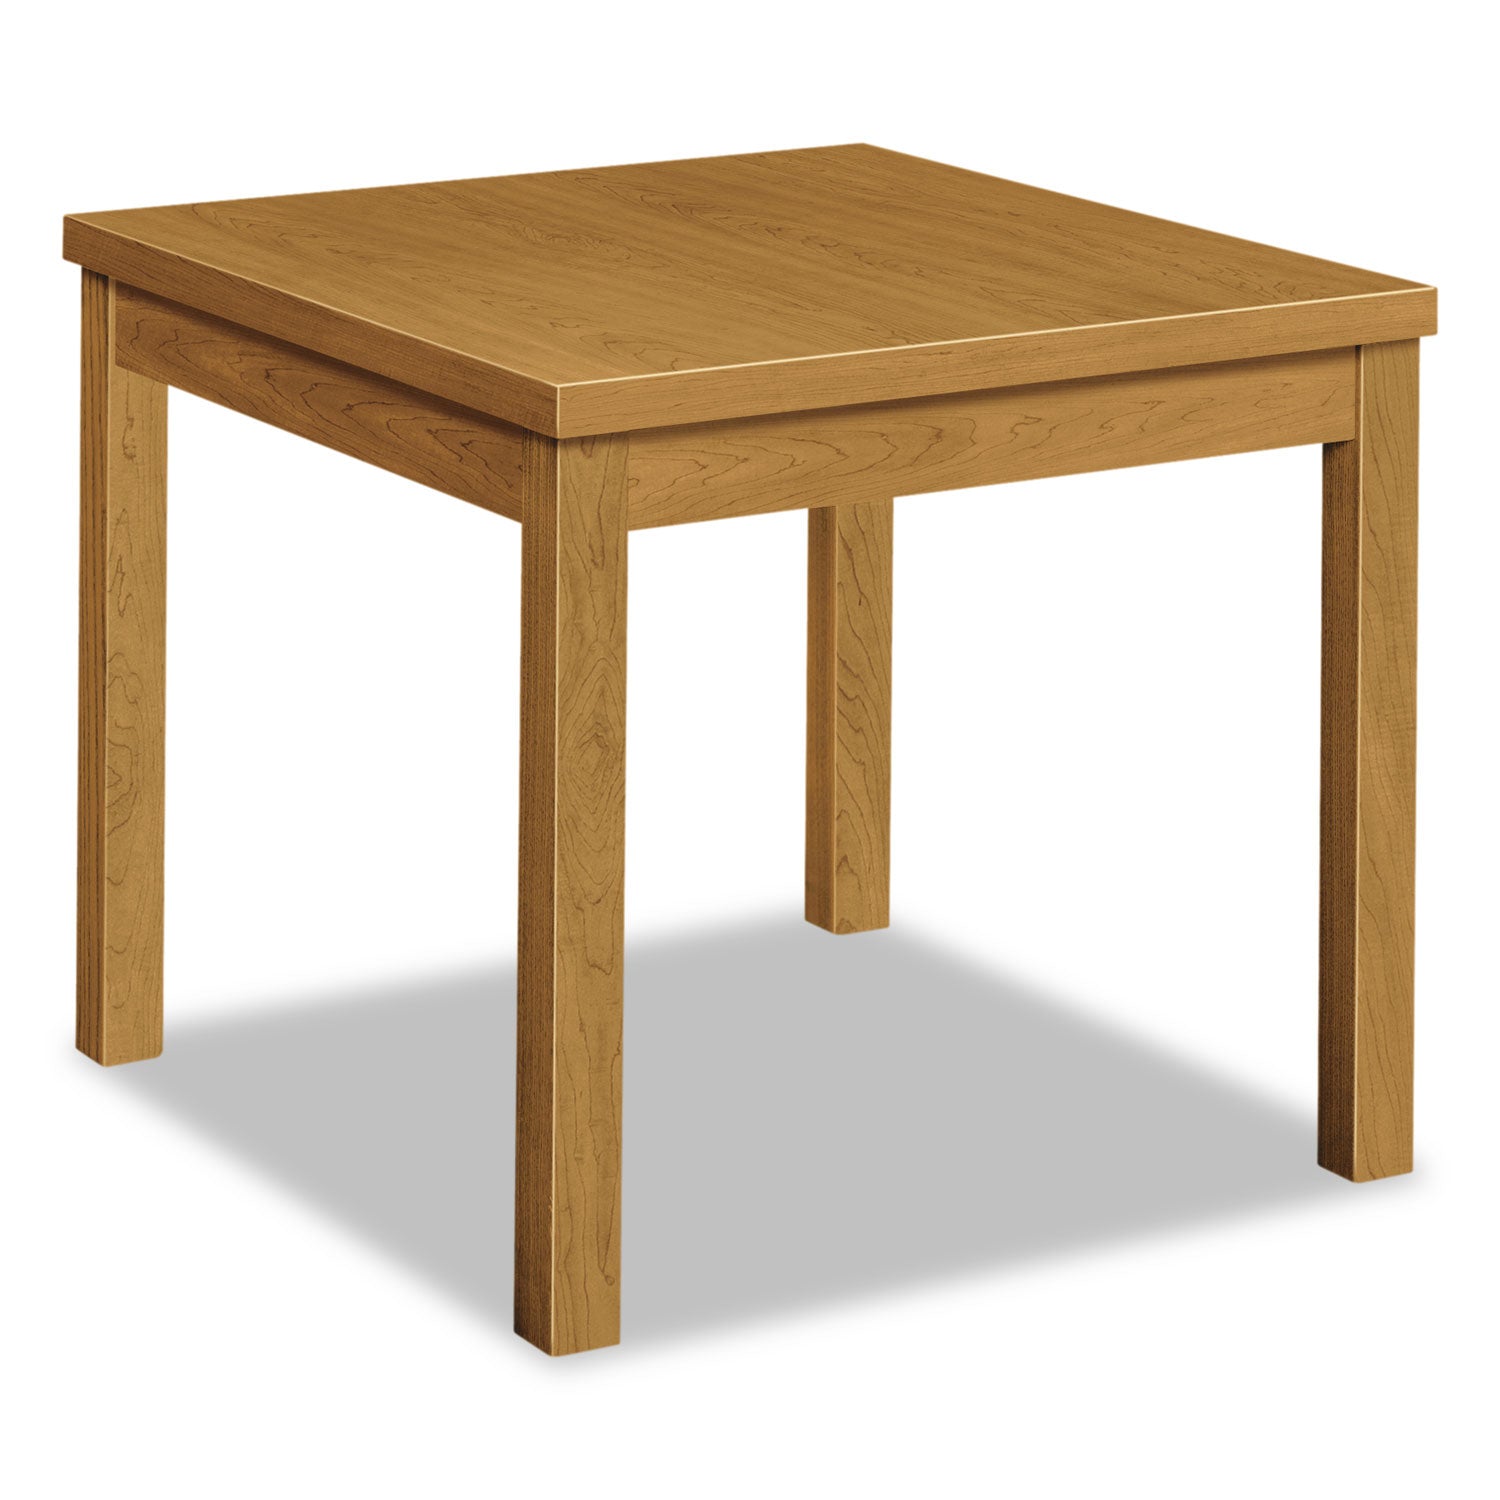 Laminate Occasional Table, Square, 24w x 24d x 20h, Harvest - 